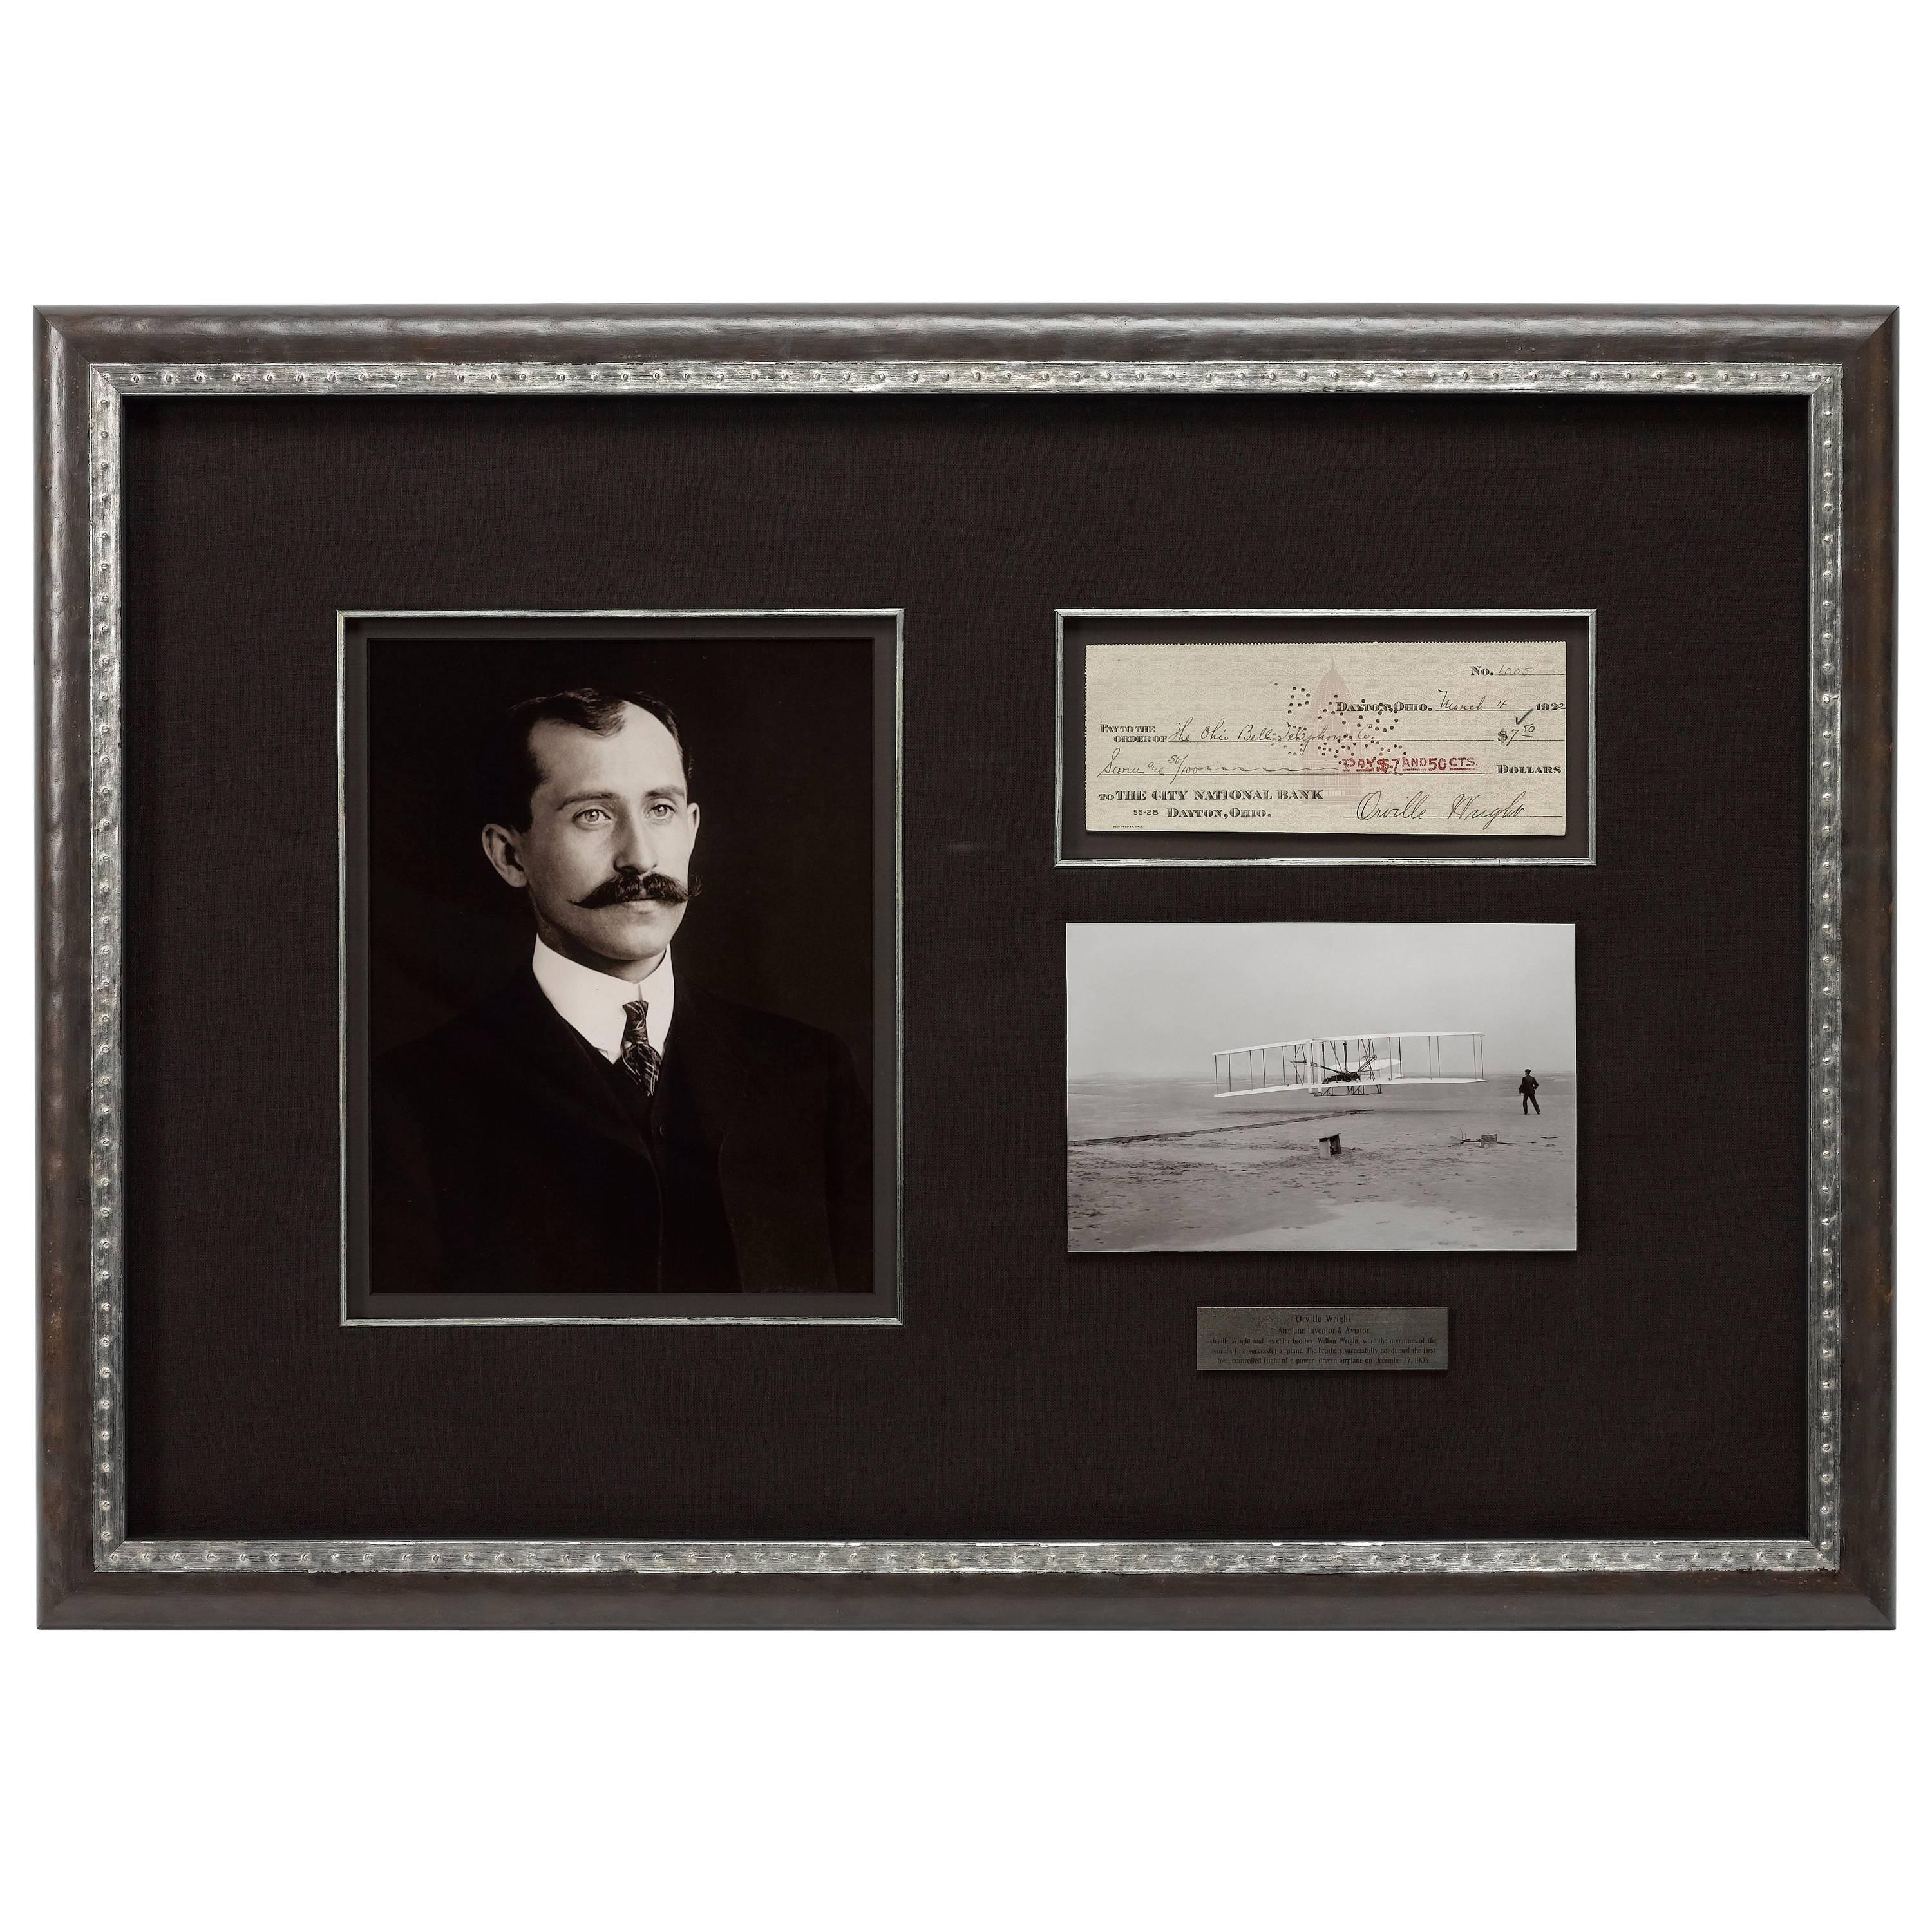 Orville Wright Signed Check, 1922